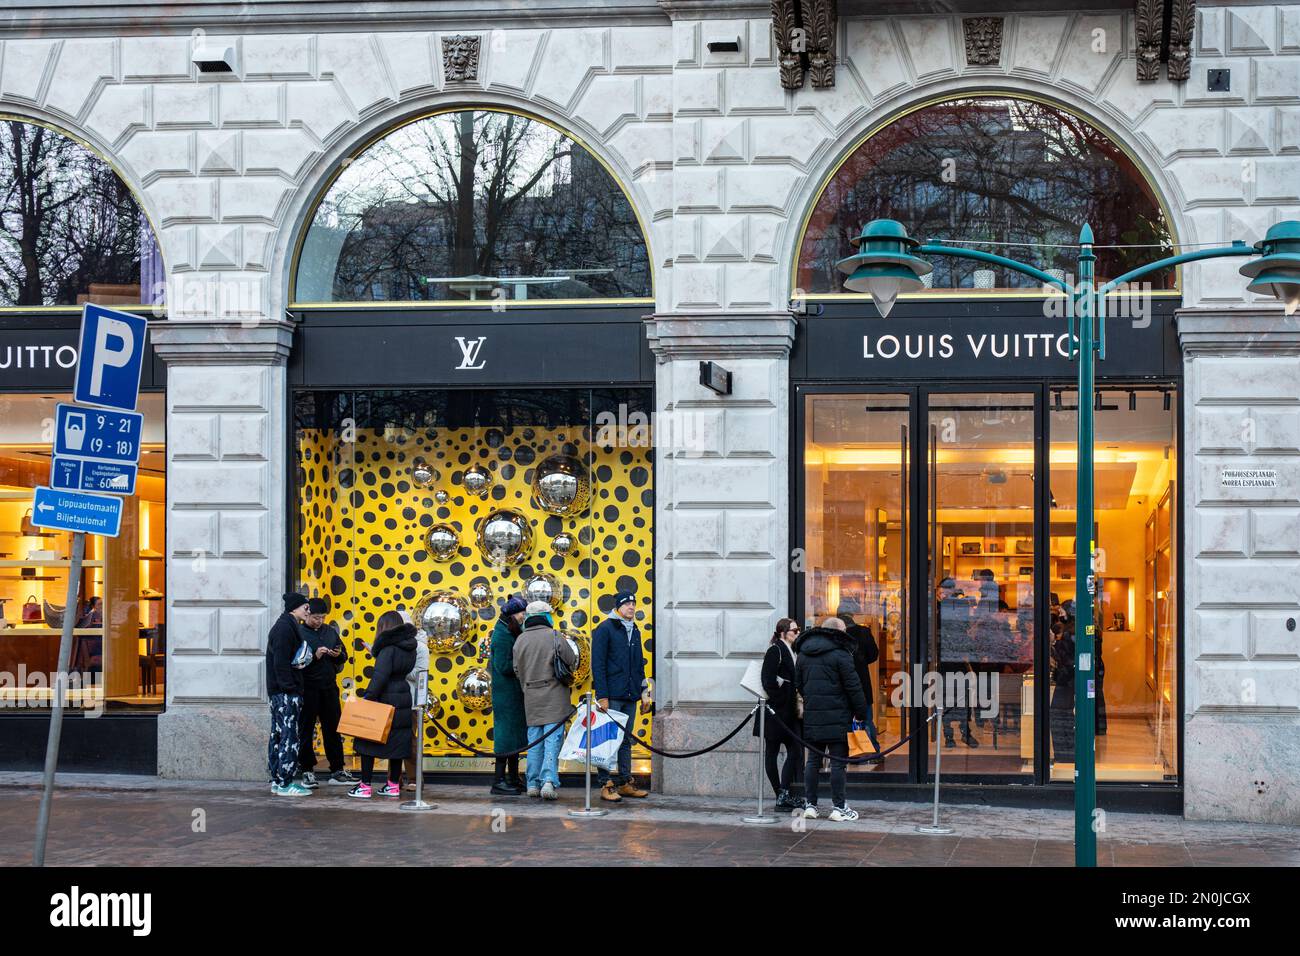 LV Louis Vuitton Fashion Store, Window Shop, Bags, Clothes and Shoes on  Display for Sale, Modern Louis Vuitton Fashion House Editorial Photo -  Image of color, 2020: 175648091